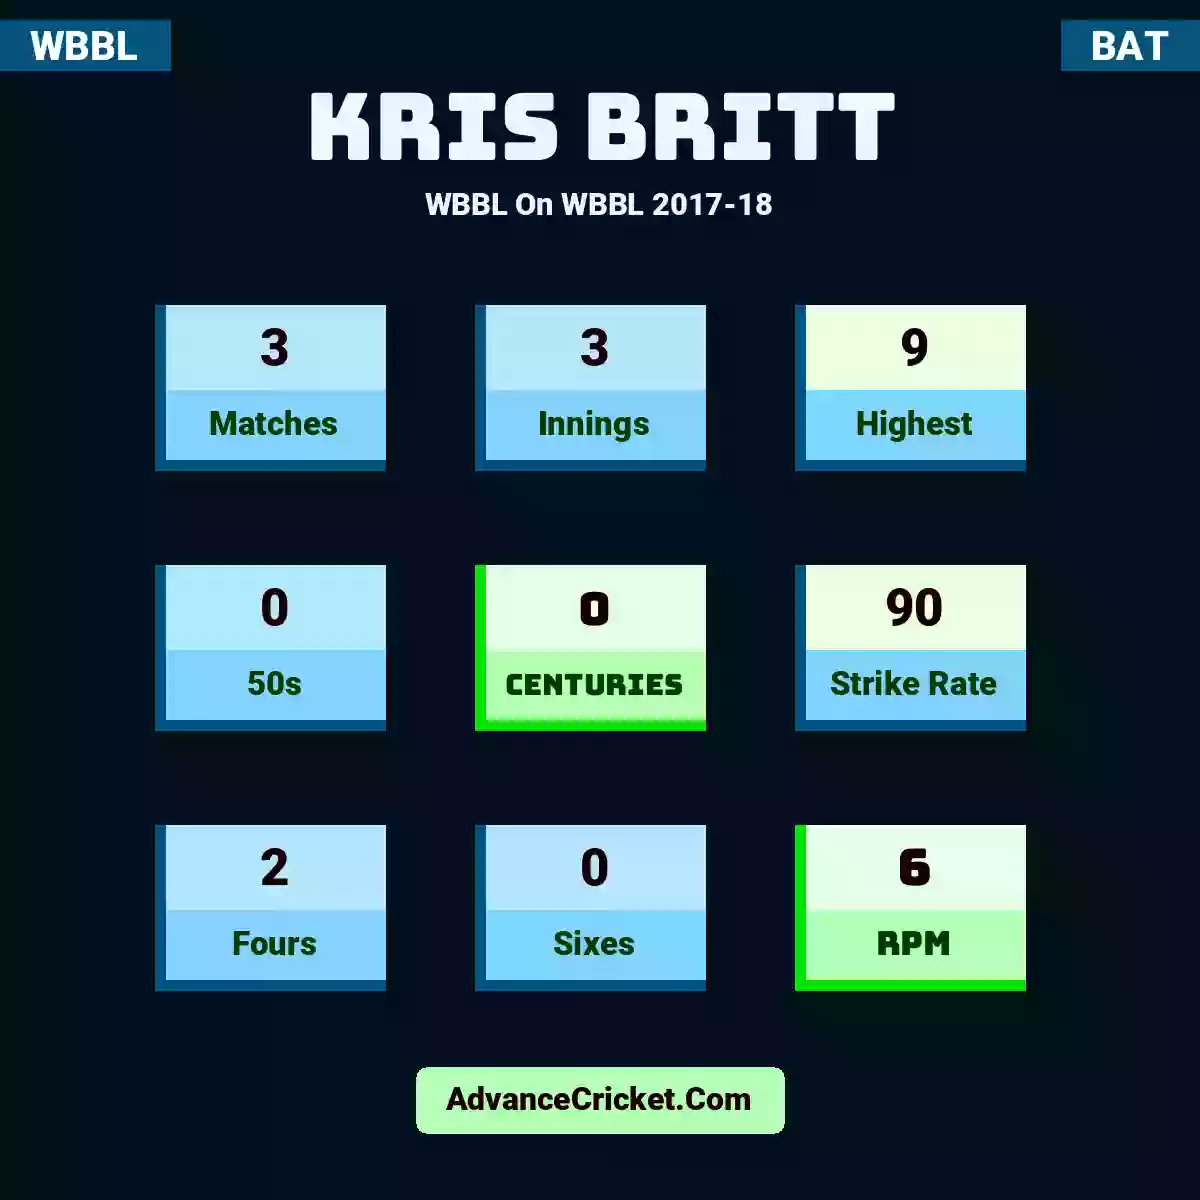 Kris Britt WBBL  On WBBL 2017-18, Kris Britt played 3 matches, scored 9 runs as highest, 0 half-centuries, and 0 centuries, with a strike rate of 90. K.Britt hit 2 fours and 0 sixes, with an RPM of 6.